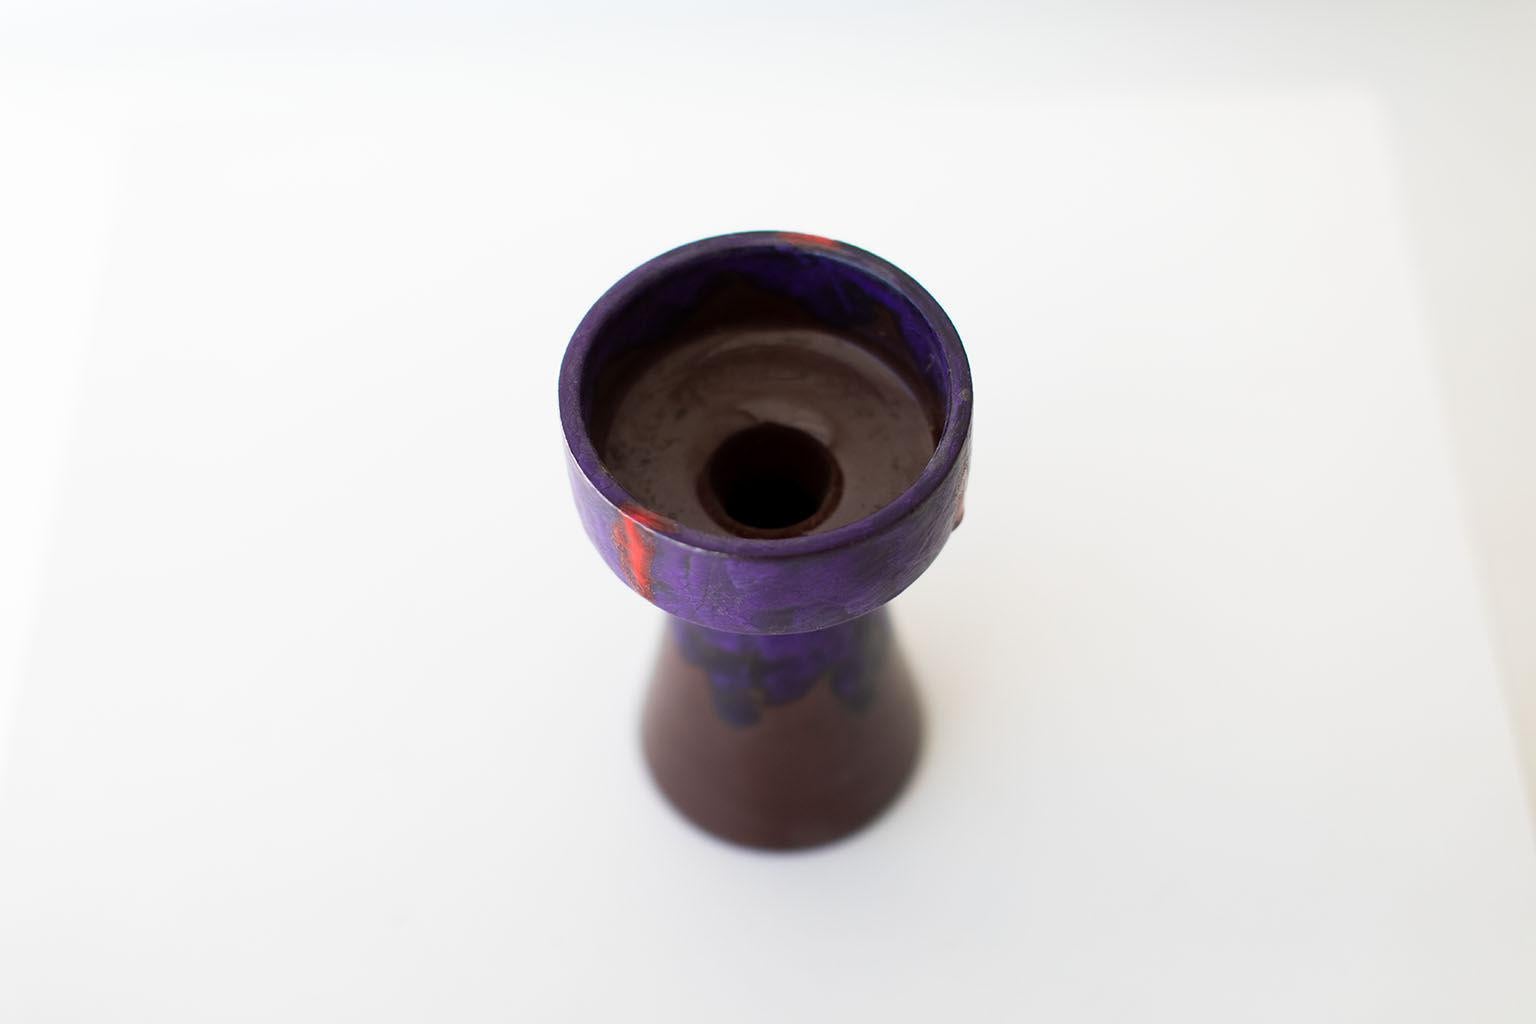 Manufacturer: Bitossi

Importer: Rosenthal Netter
Period or model: Mid-Century Modern.
Specs: Pottery

Condition:

This Bitossi purple candle holder or vase for Rosenthal Netter is in excellent condition. It has wonderful proportions with